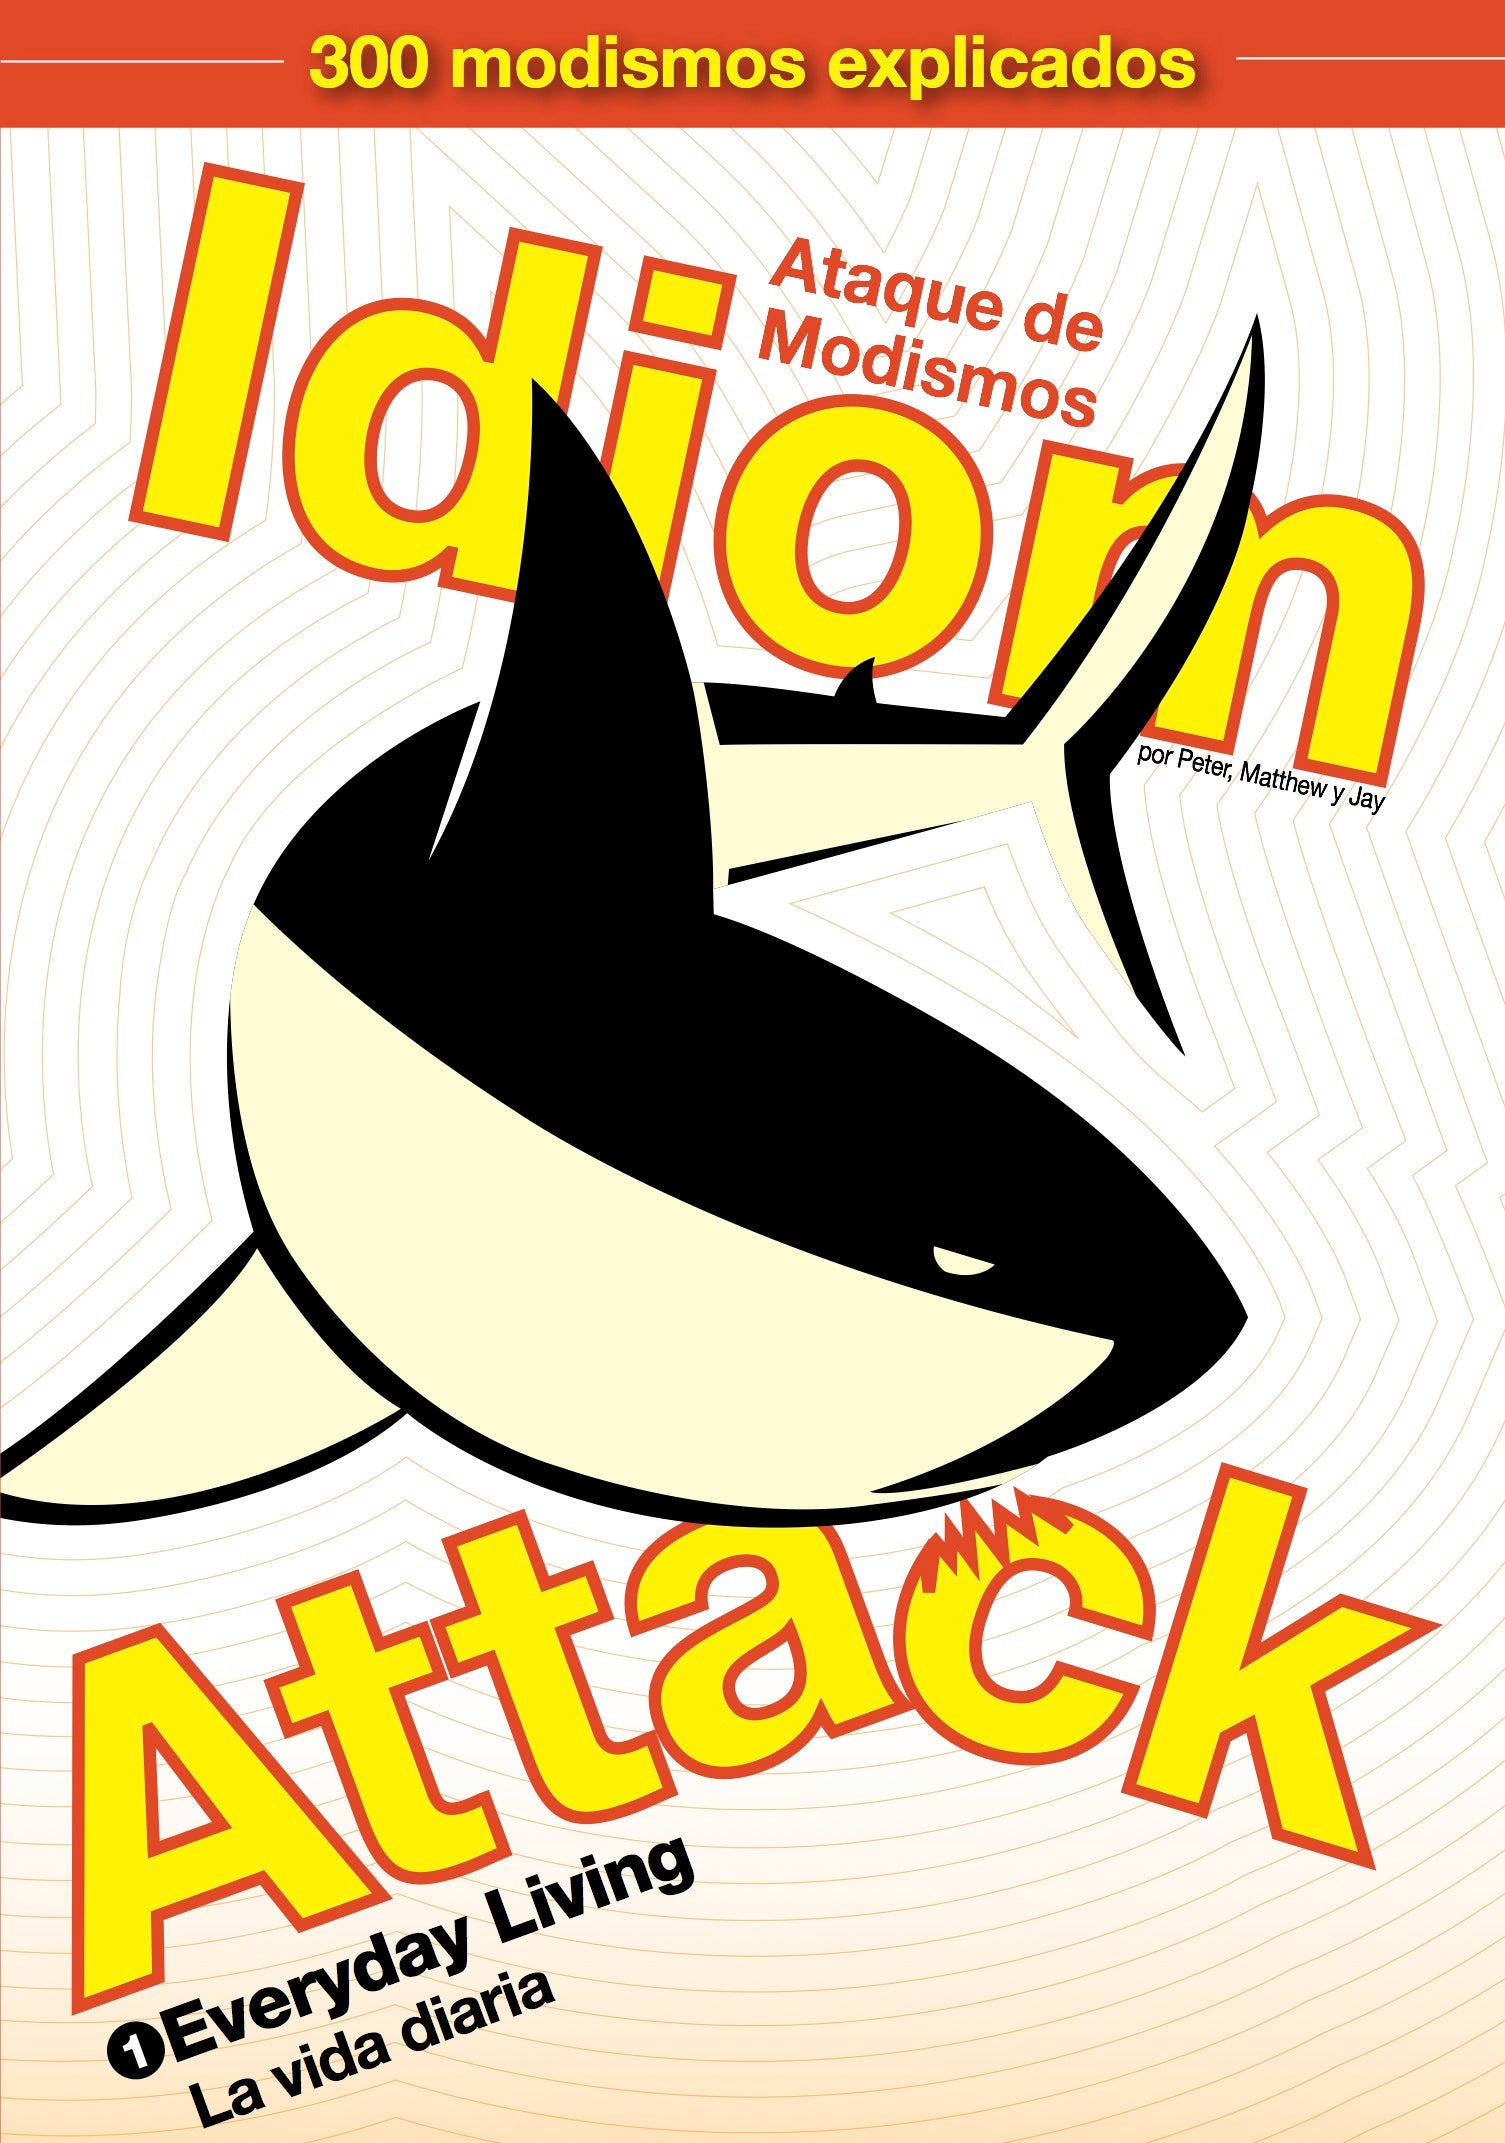 Idiom Attack, Vol. 1 - Everyday Living (Spanish Edition): Ataque de Modismos 1 - La vida diaria : English Idioms for ESL Learners: With 300+ Idioms in 25 Themed Chapters w/ free MP3 at IdiomAttack.com